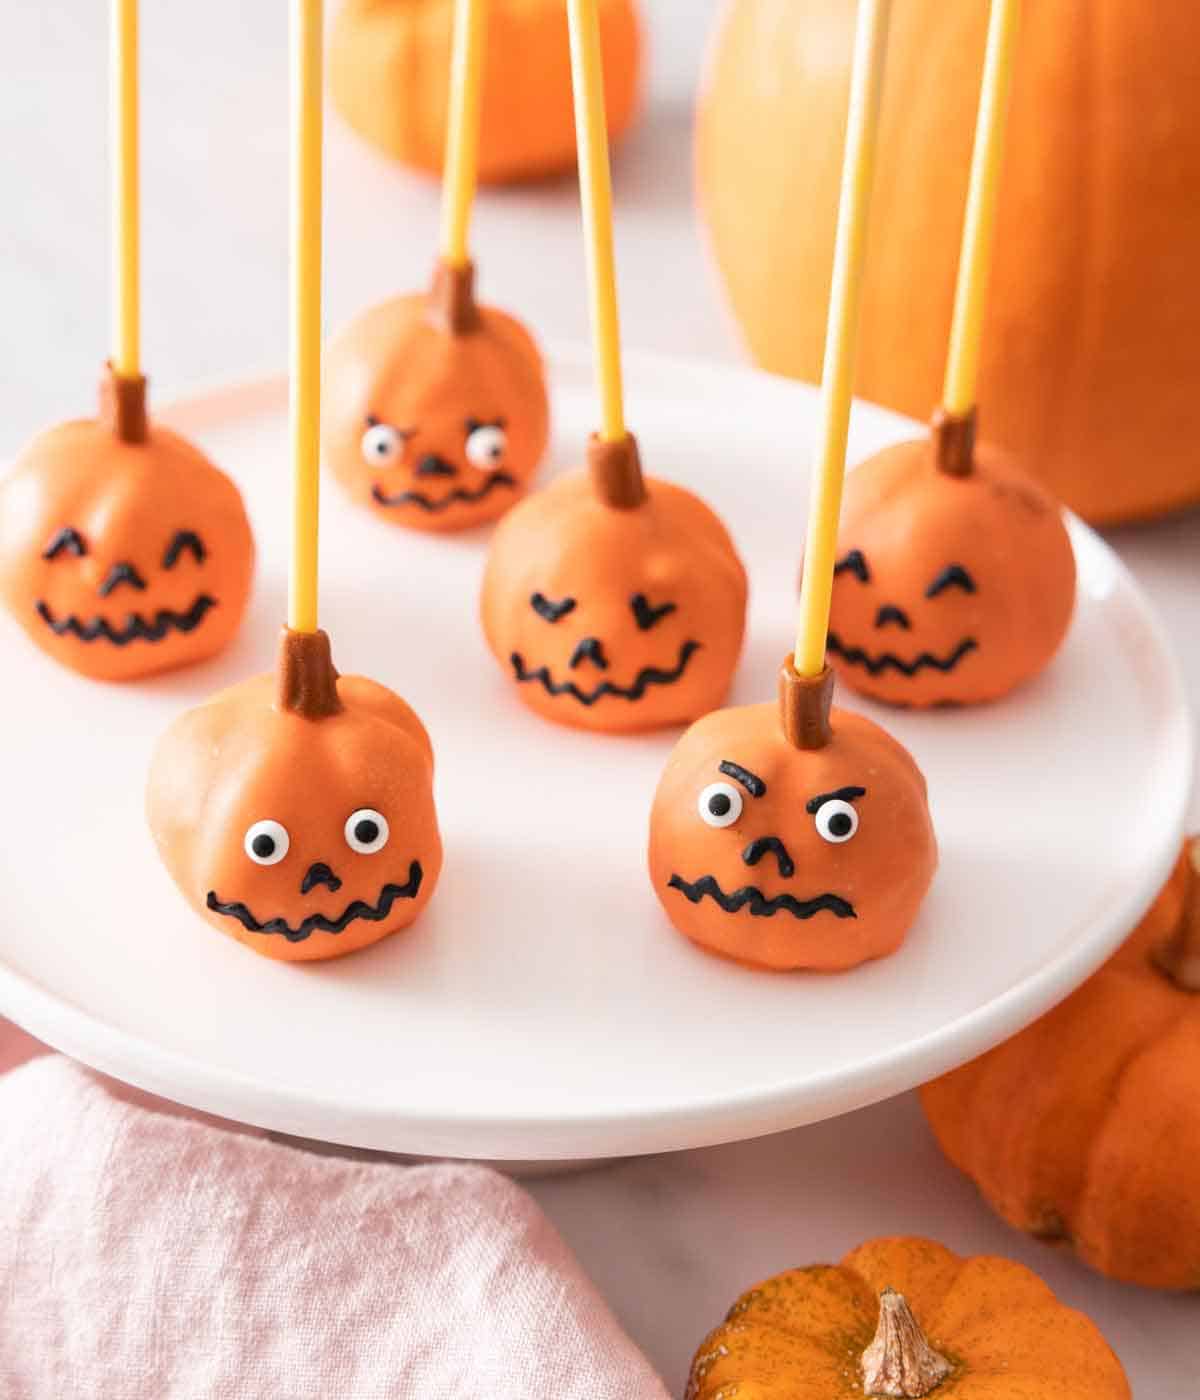 Multiple pumpkin cake pops with faces on a plate.